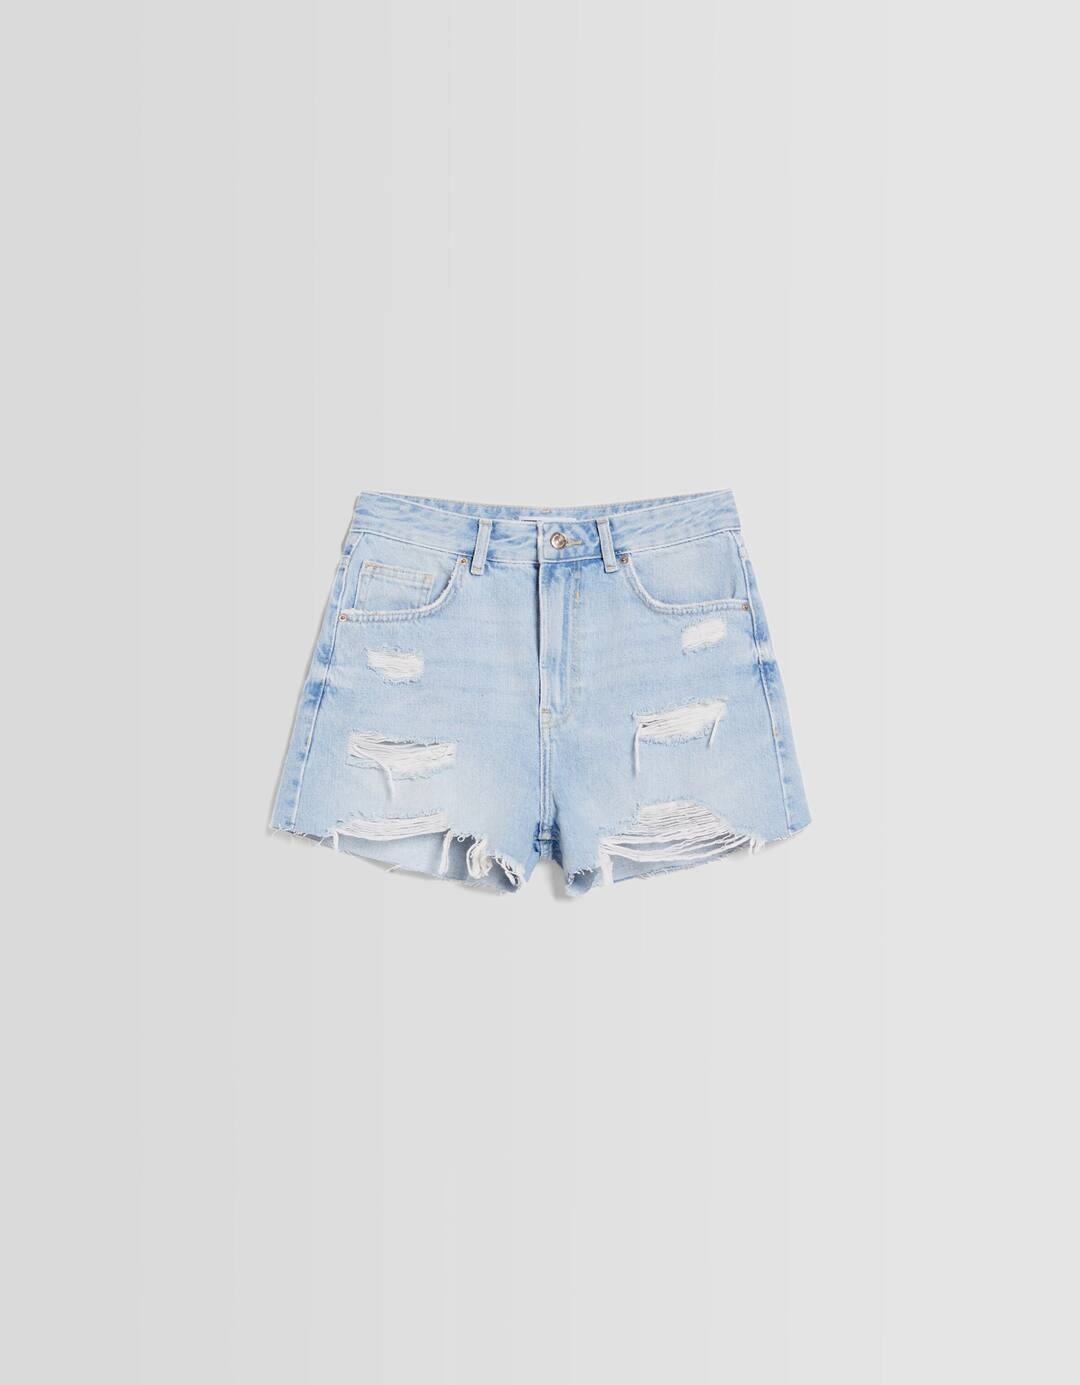 Ripped denim shorts with pockets